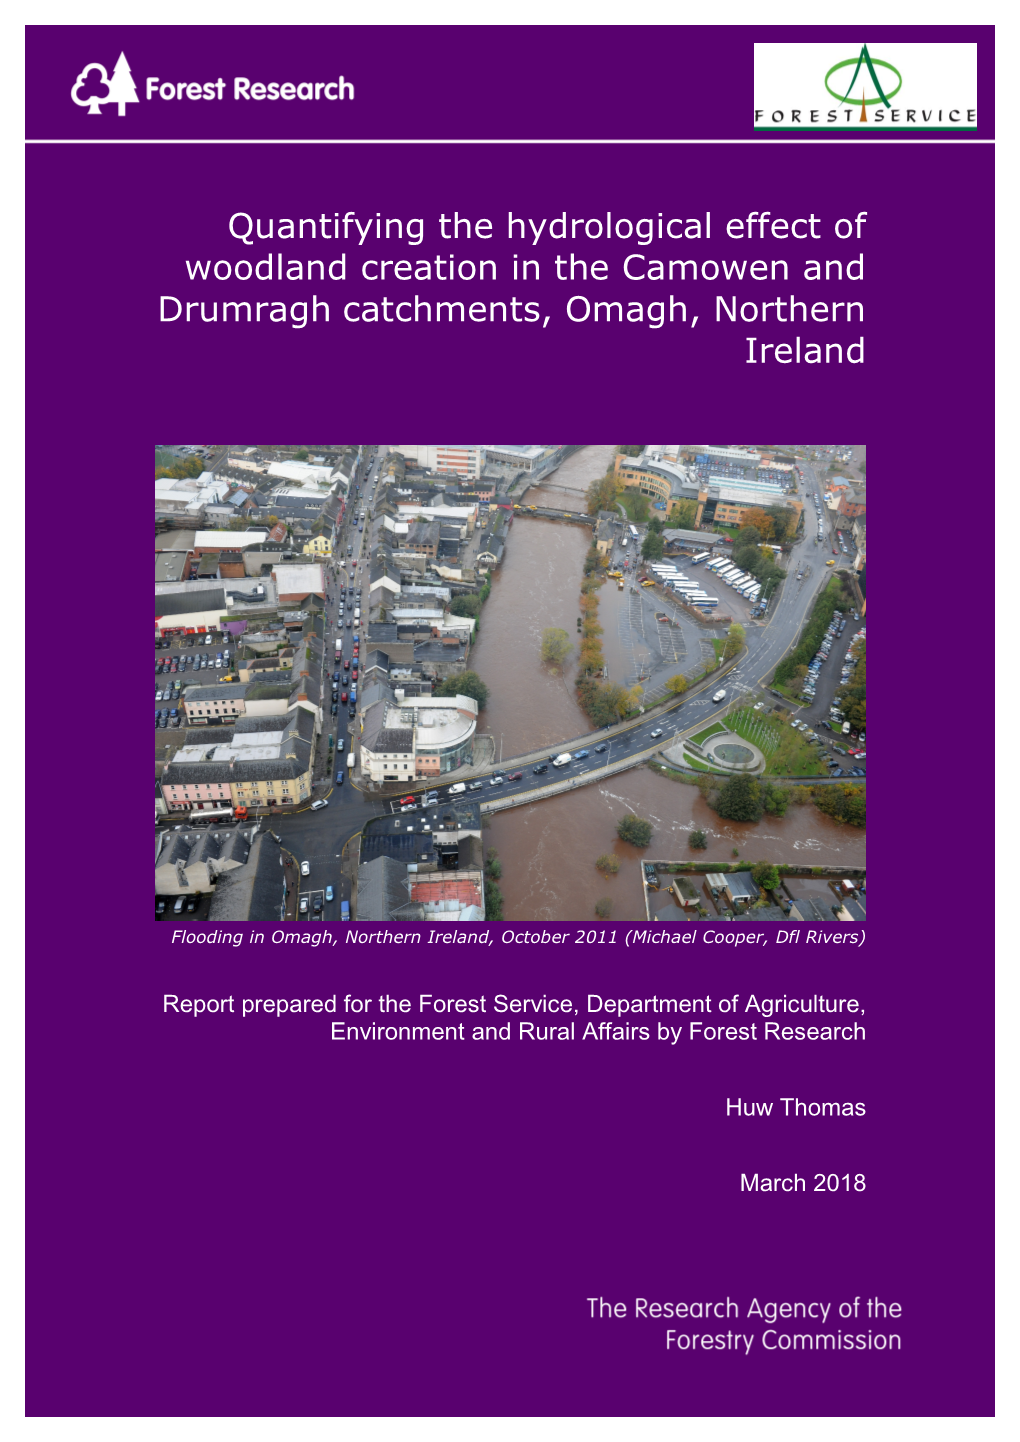 Quantifying the Hydrological Effect of Woodland Creation in the Camowen and Drumragh Catchments, Omagh, Northern Ireland